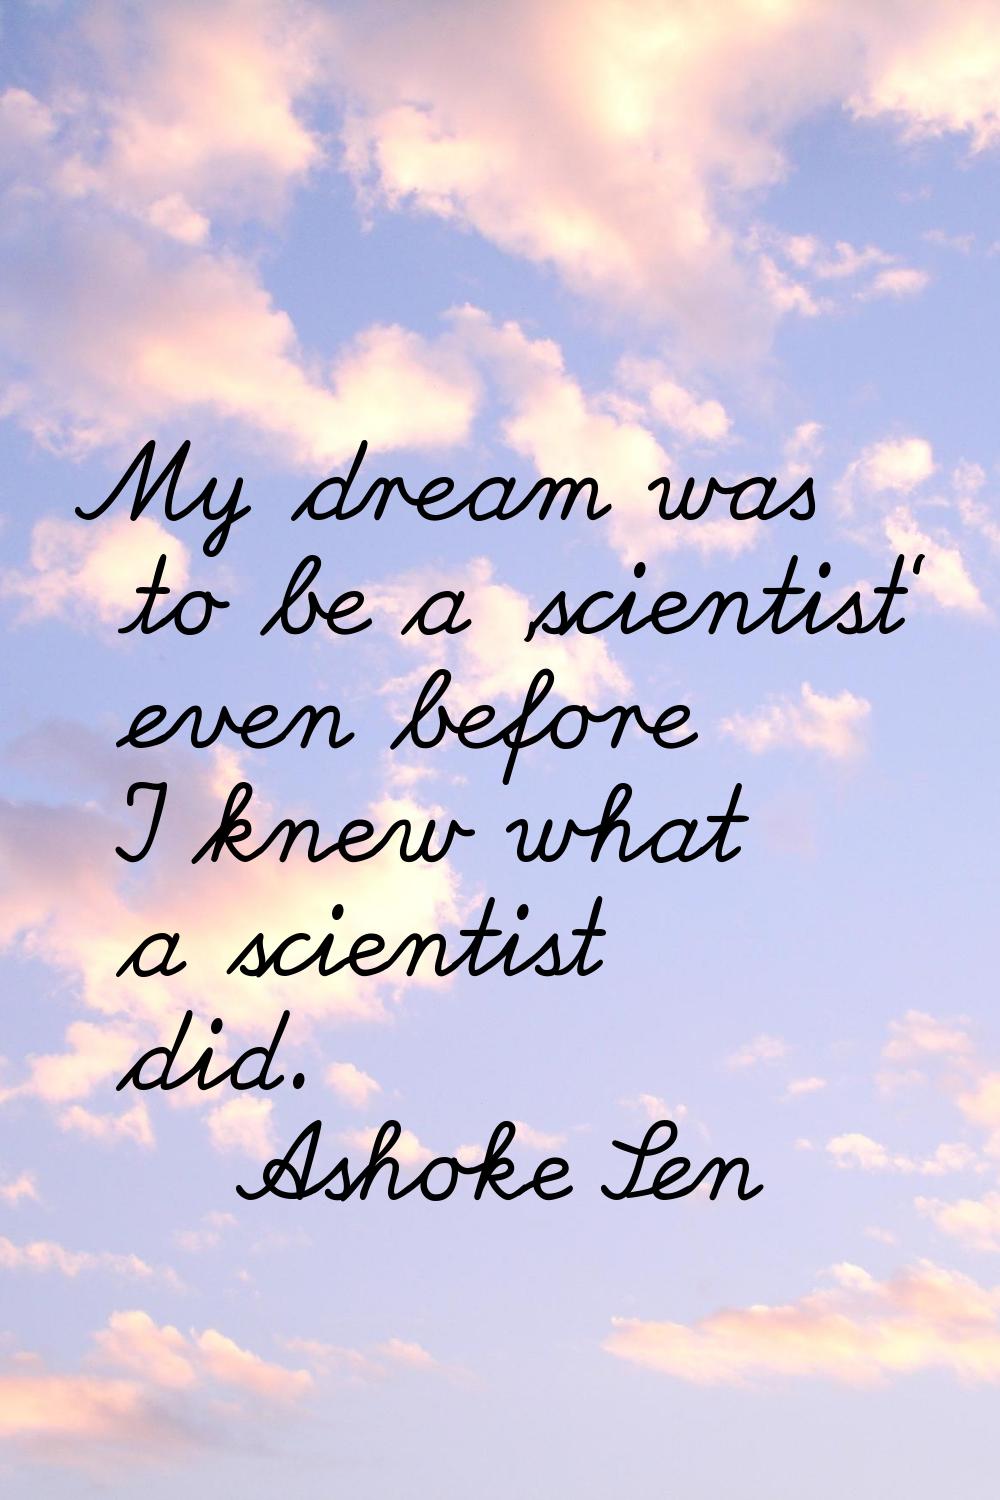 My dream was to be a 'scientist' even before I knew what a scientist did.